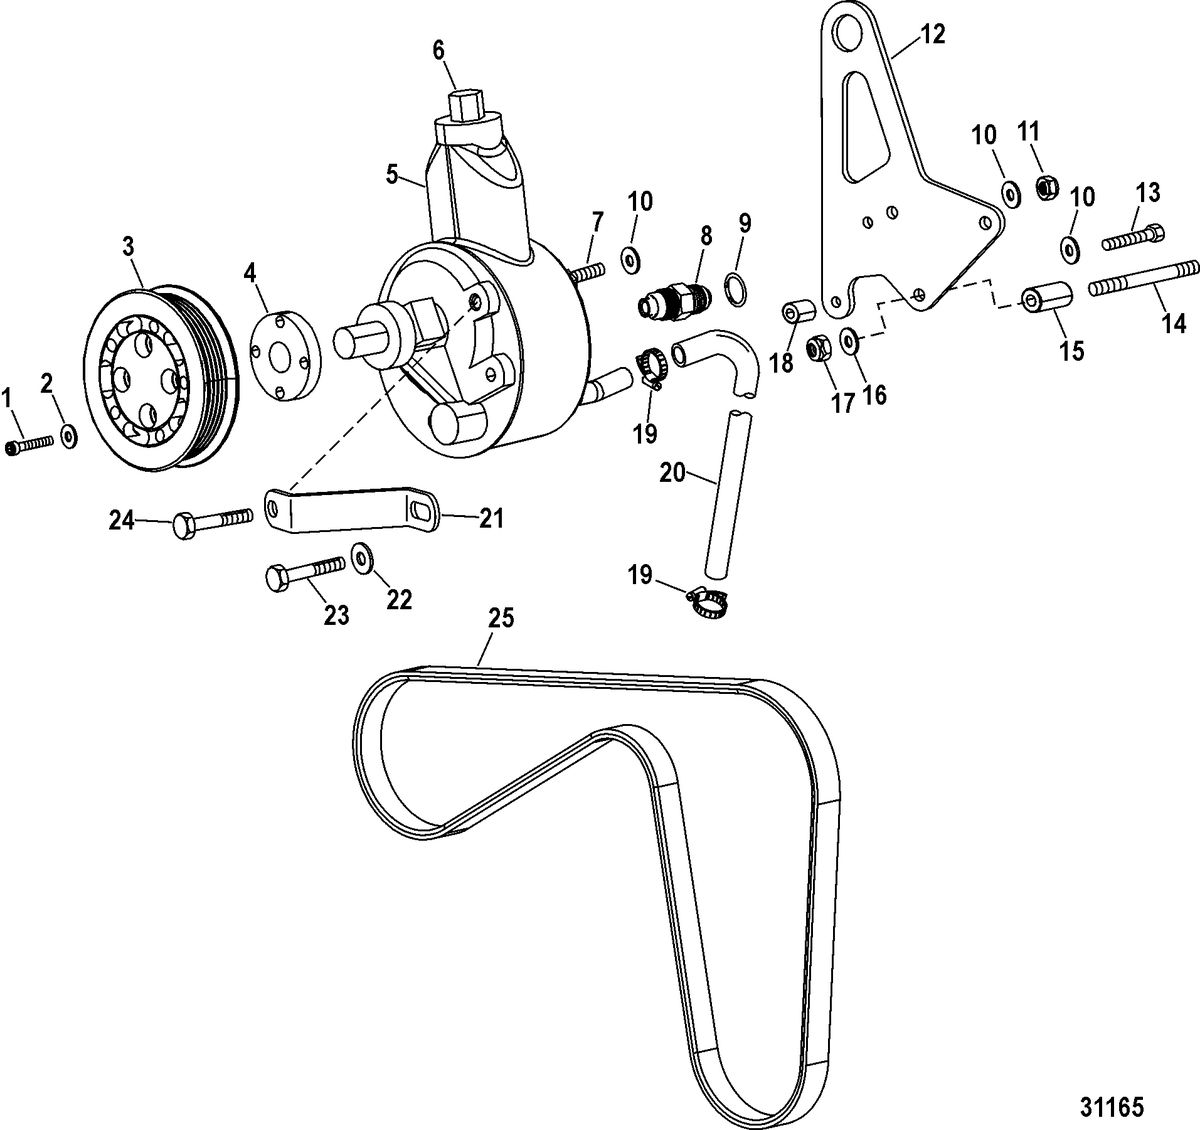 RACE STERNDRIVE 1200 SCI Power-Assisted Steering Components(Design II)